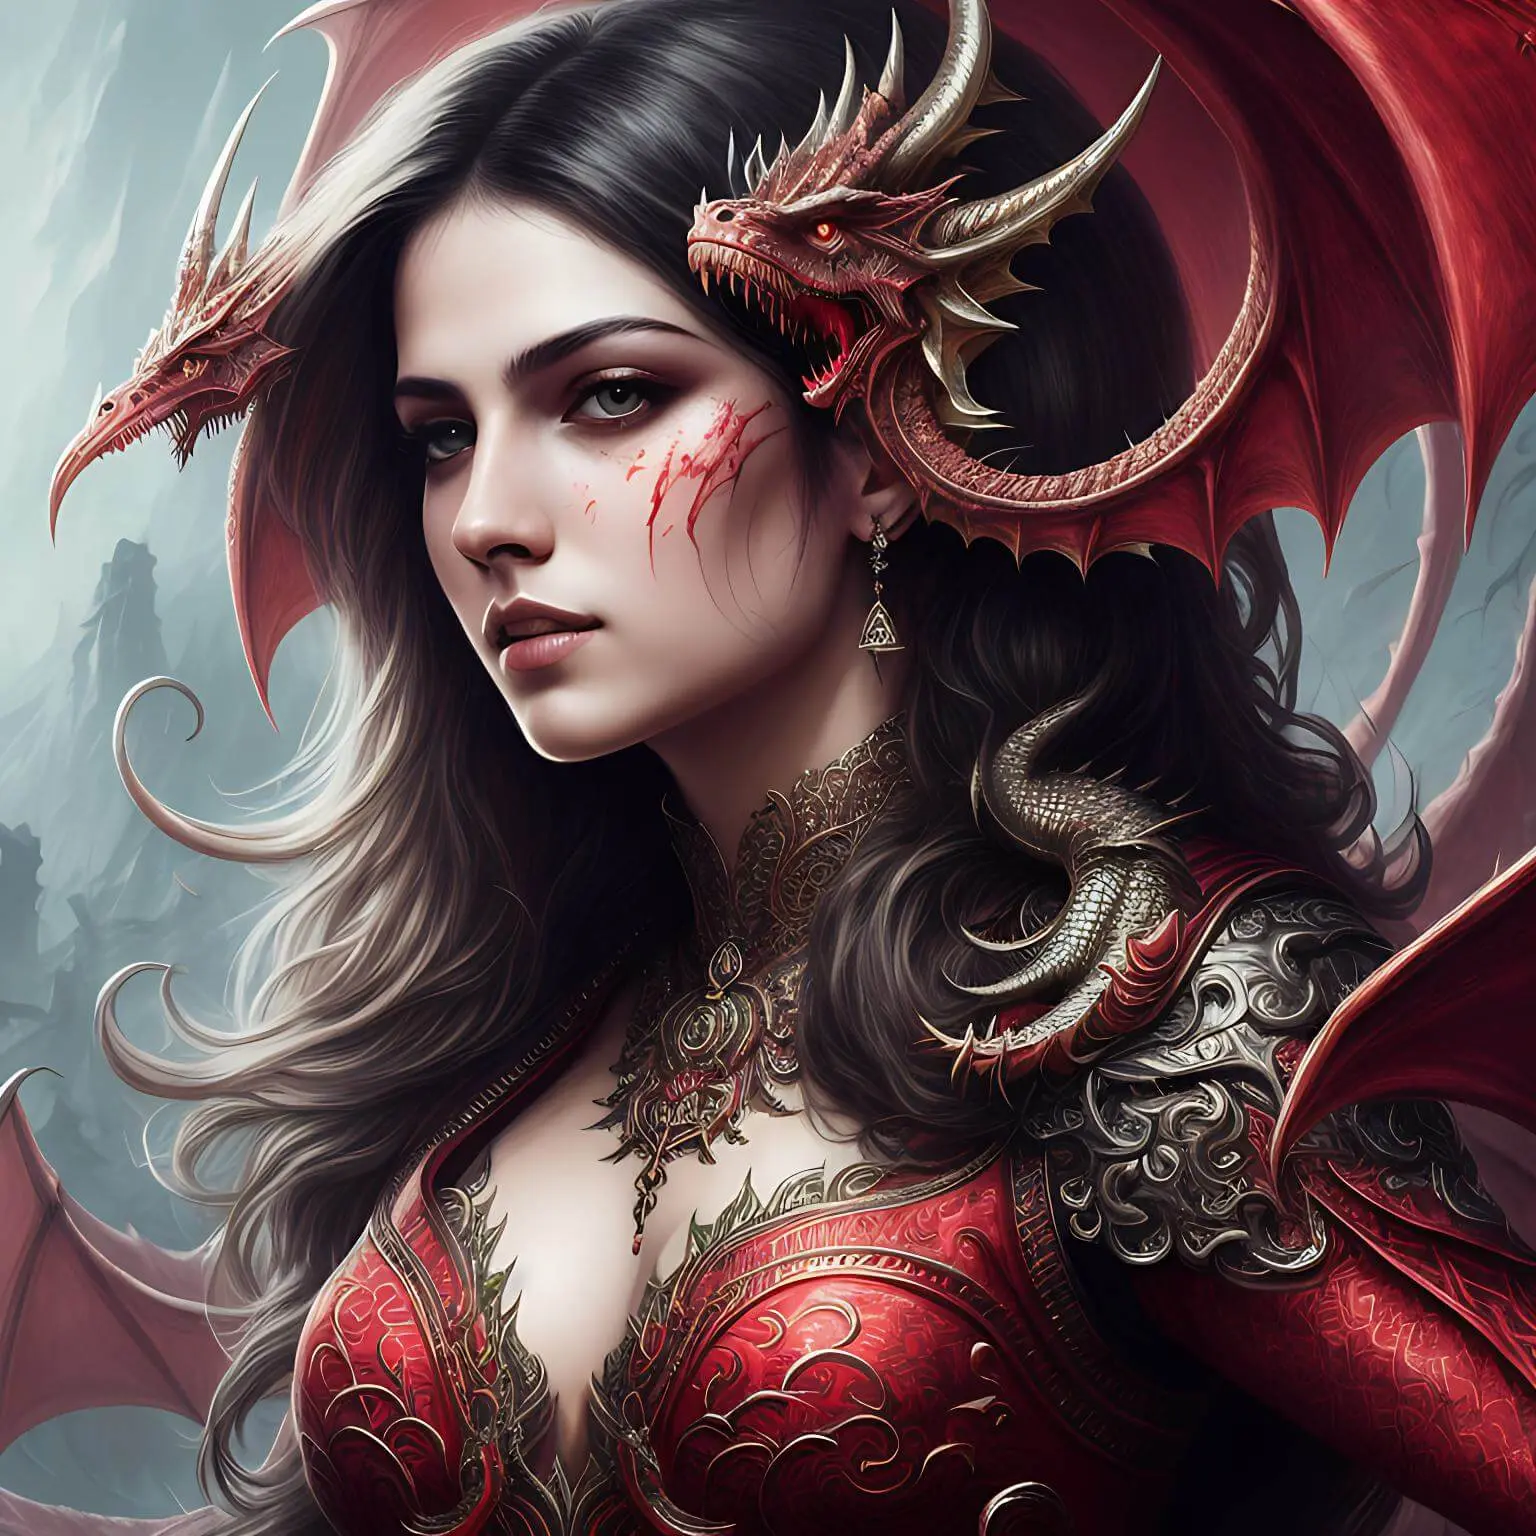 a game character enchantress wearing red clothes and horns created by Fotor ai image generator